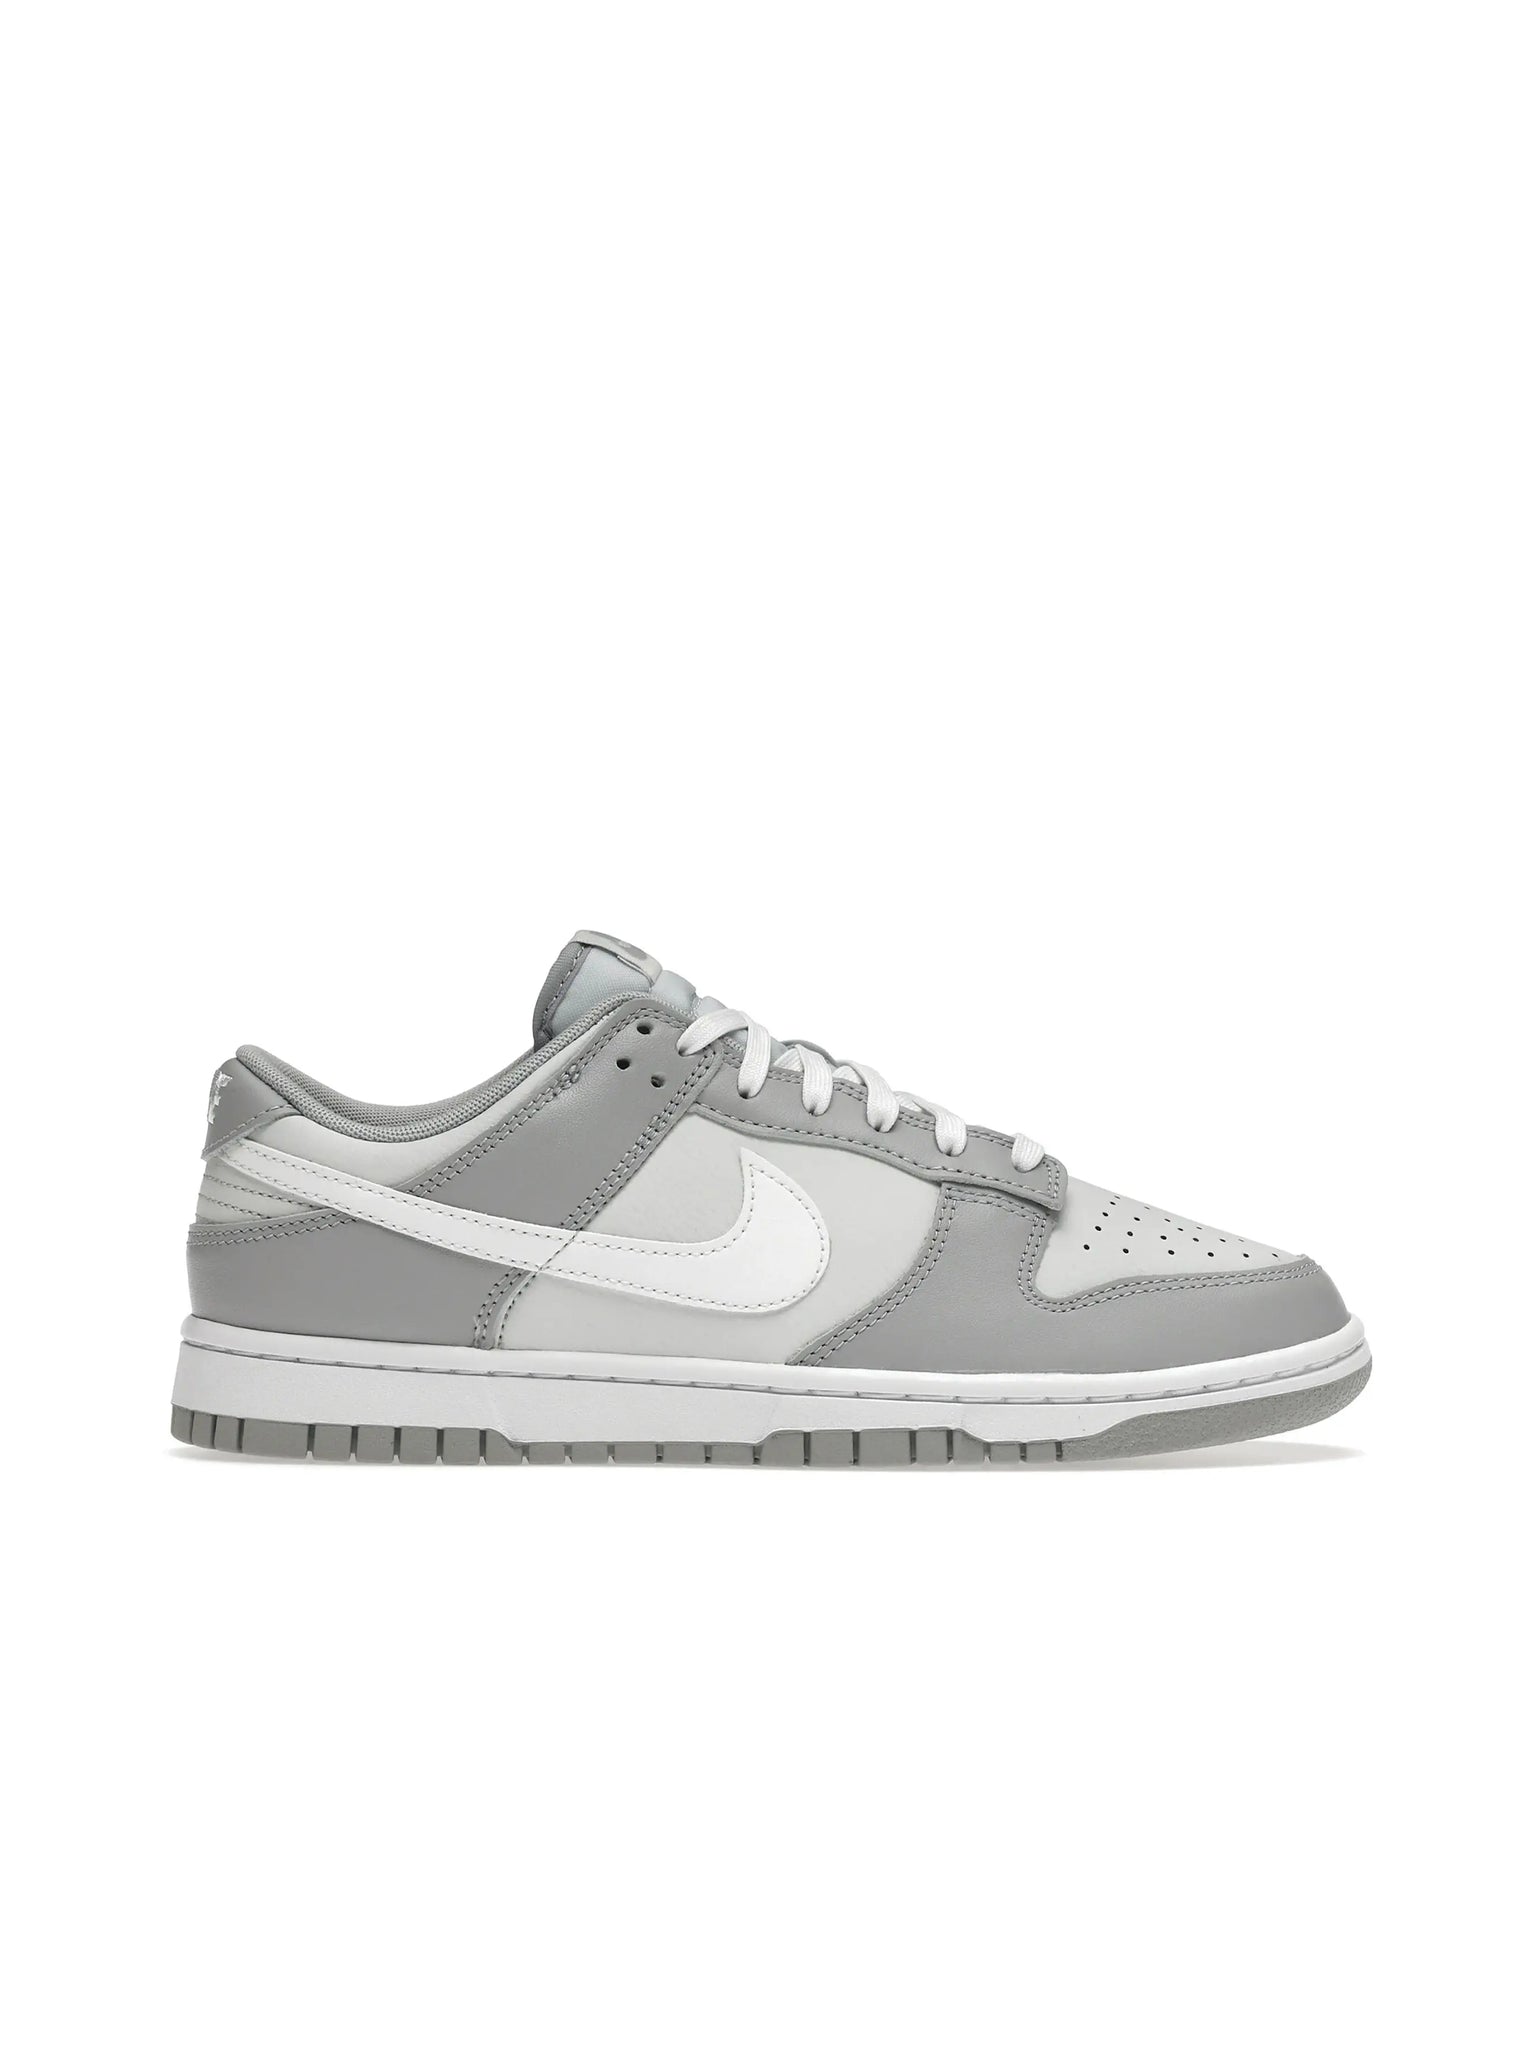 Nike Dunk Low Two Tone Grey in Auckland, New Zealand - Shop name